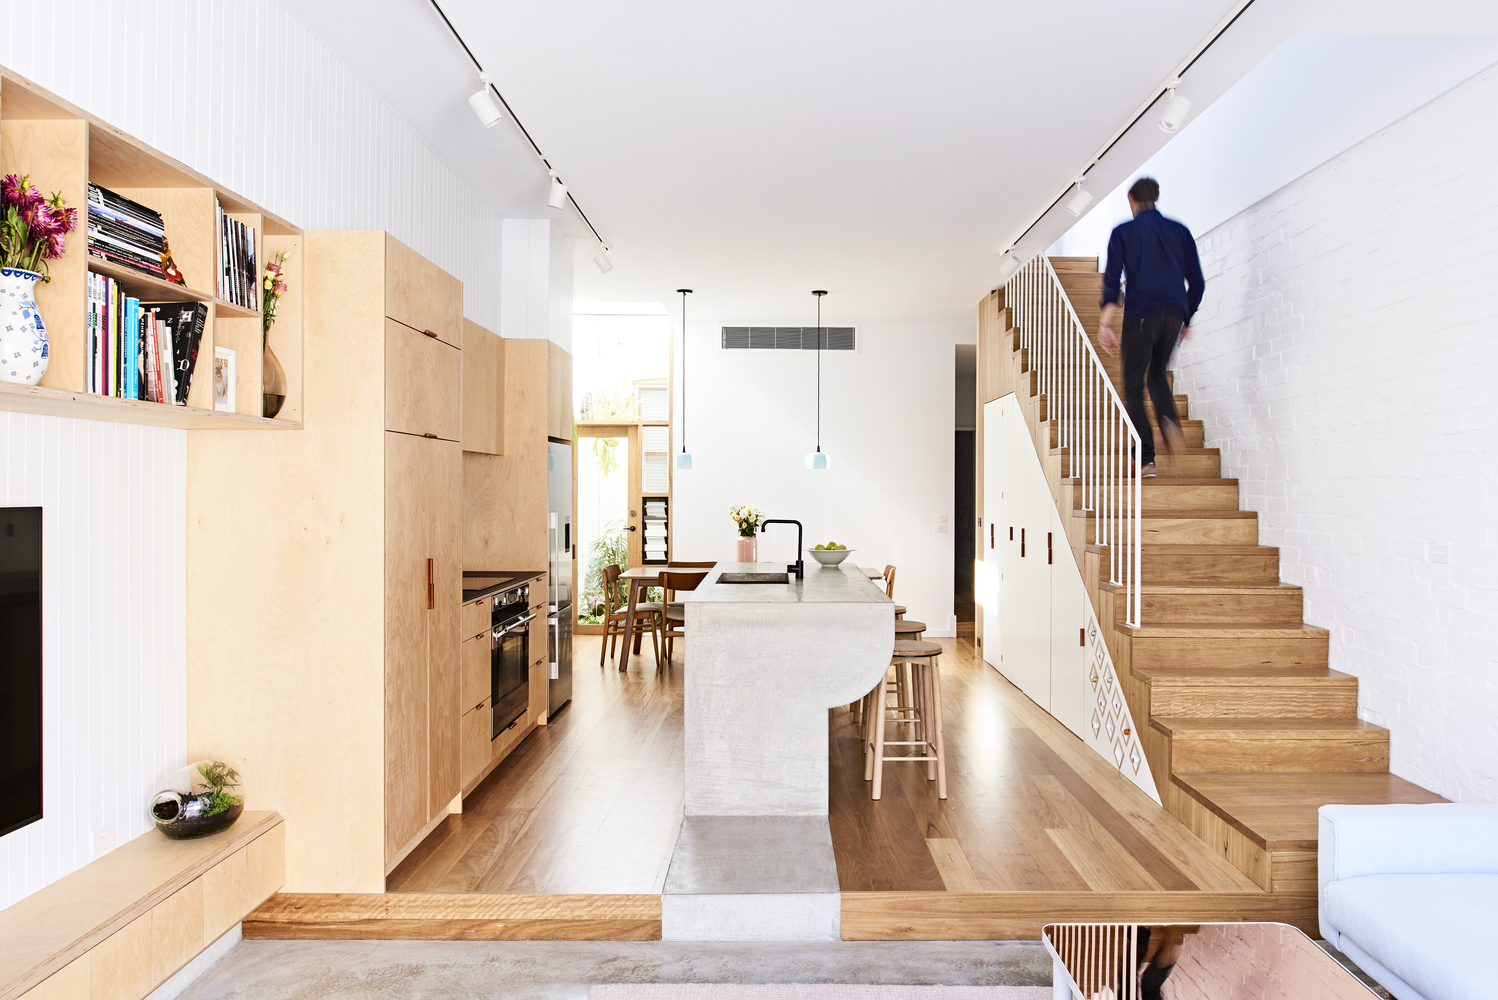 High House Sets the Level of Light, Functionality and Space to High